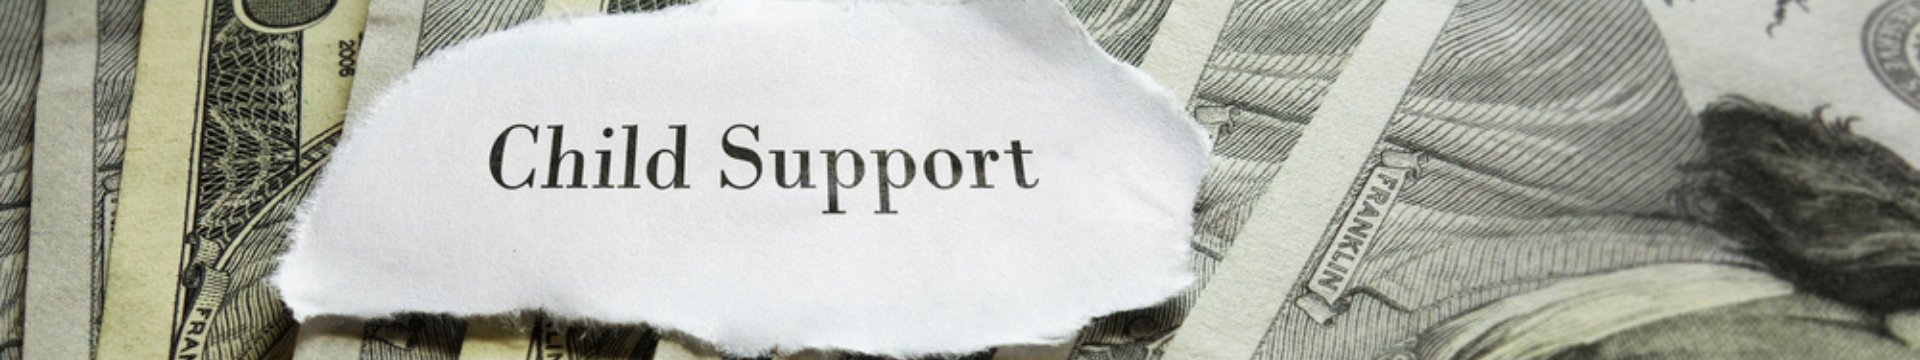 Child support written on a piece of paper sitting on top of money